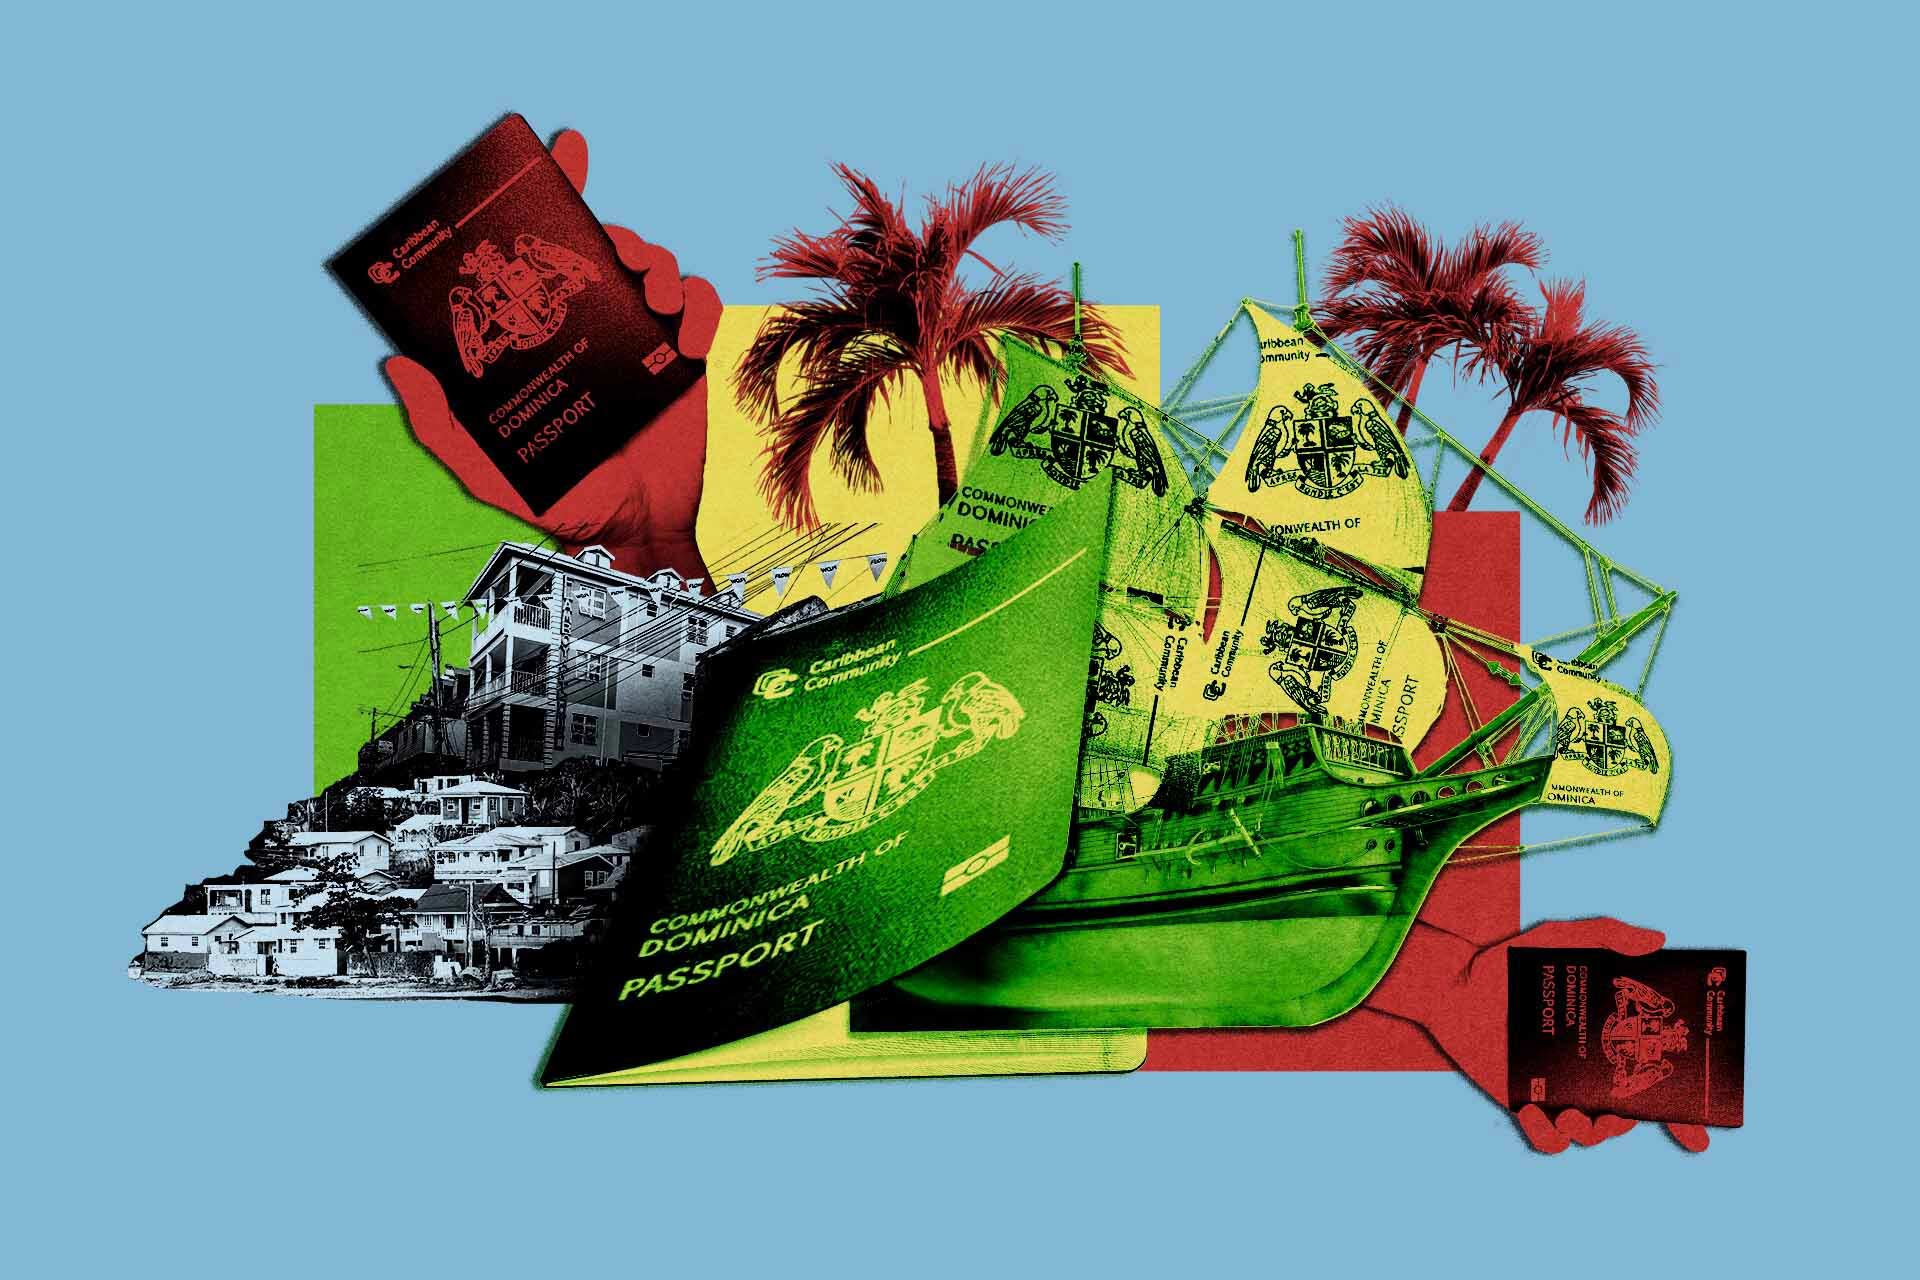 dominica-passports-of-the-caribbean/passports-of-the-caribbean-final.jpg